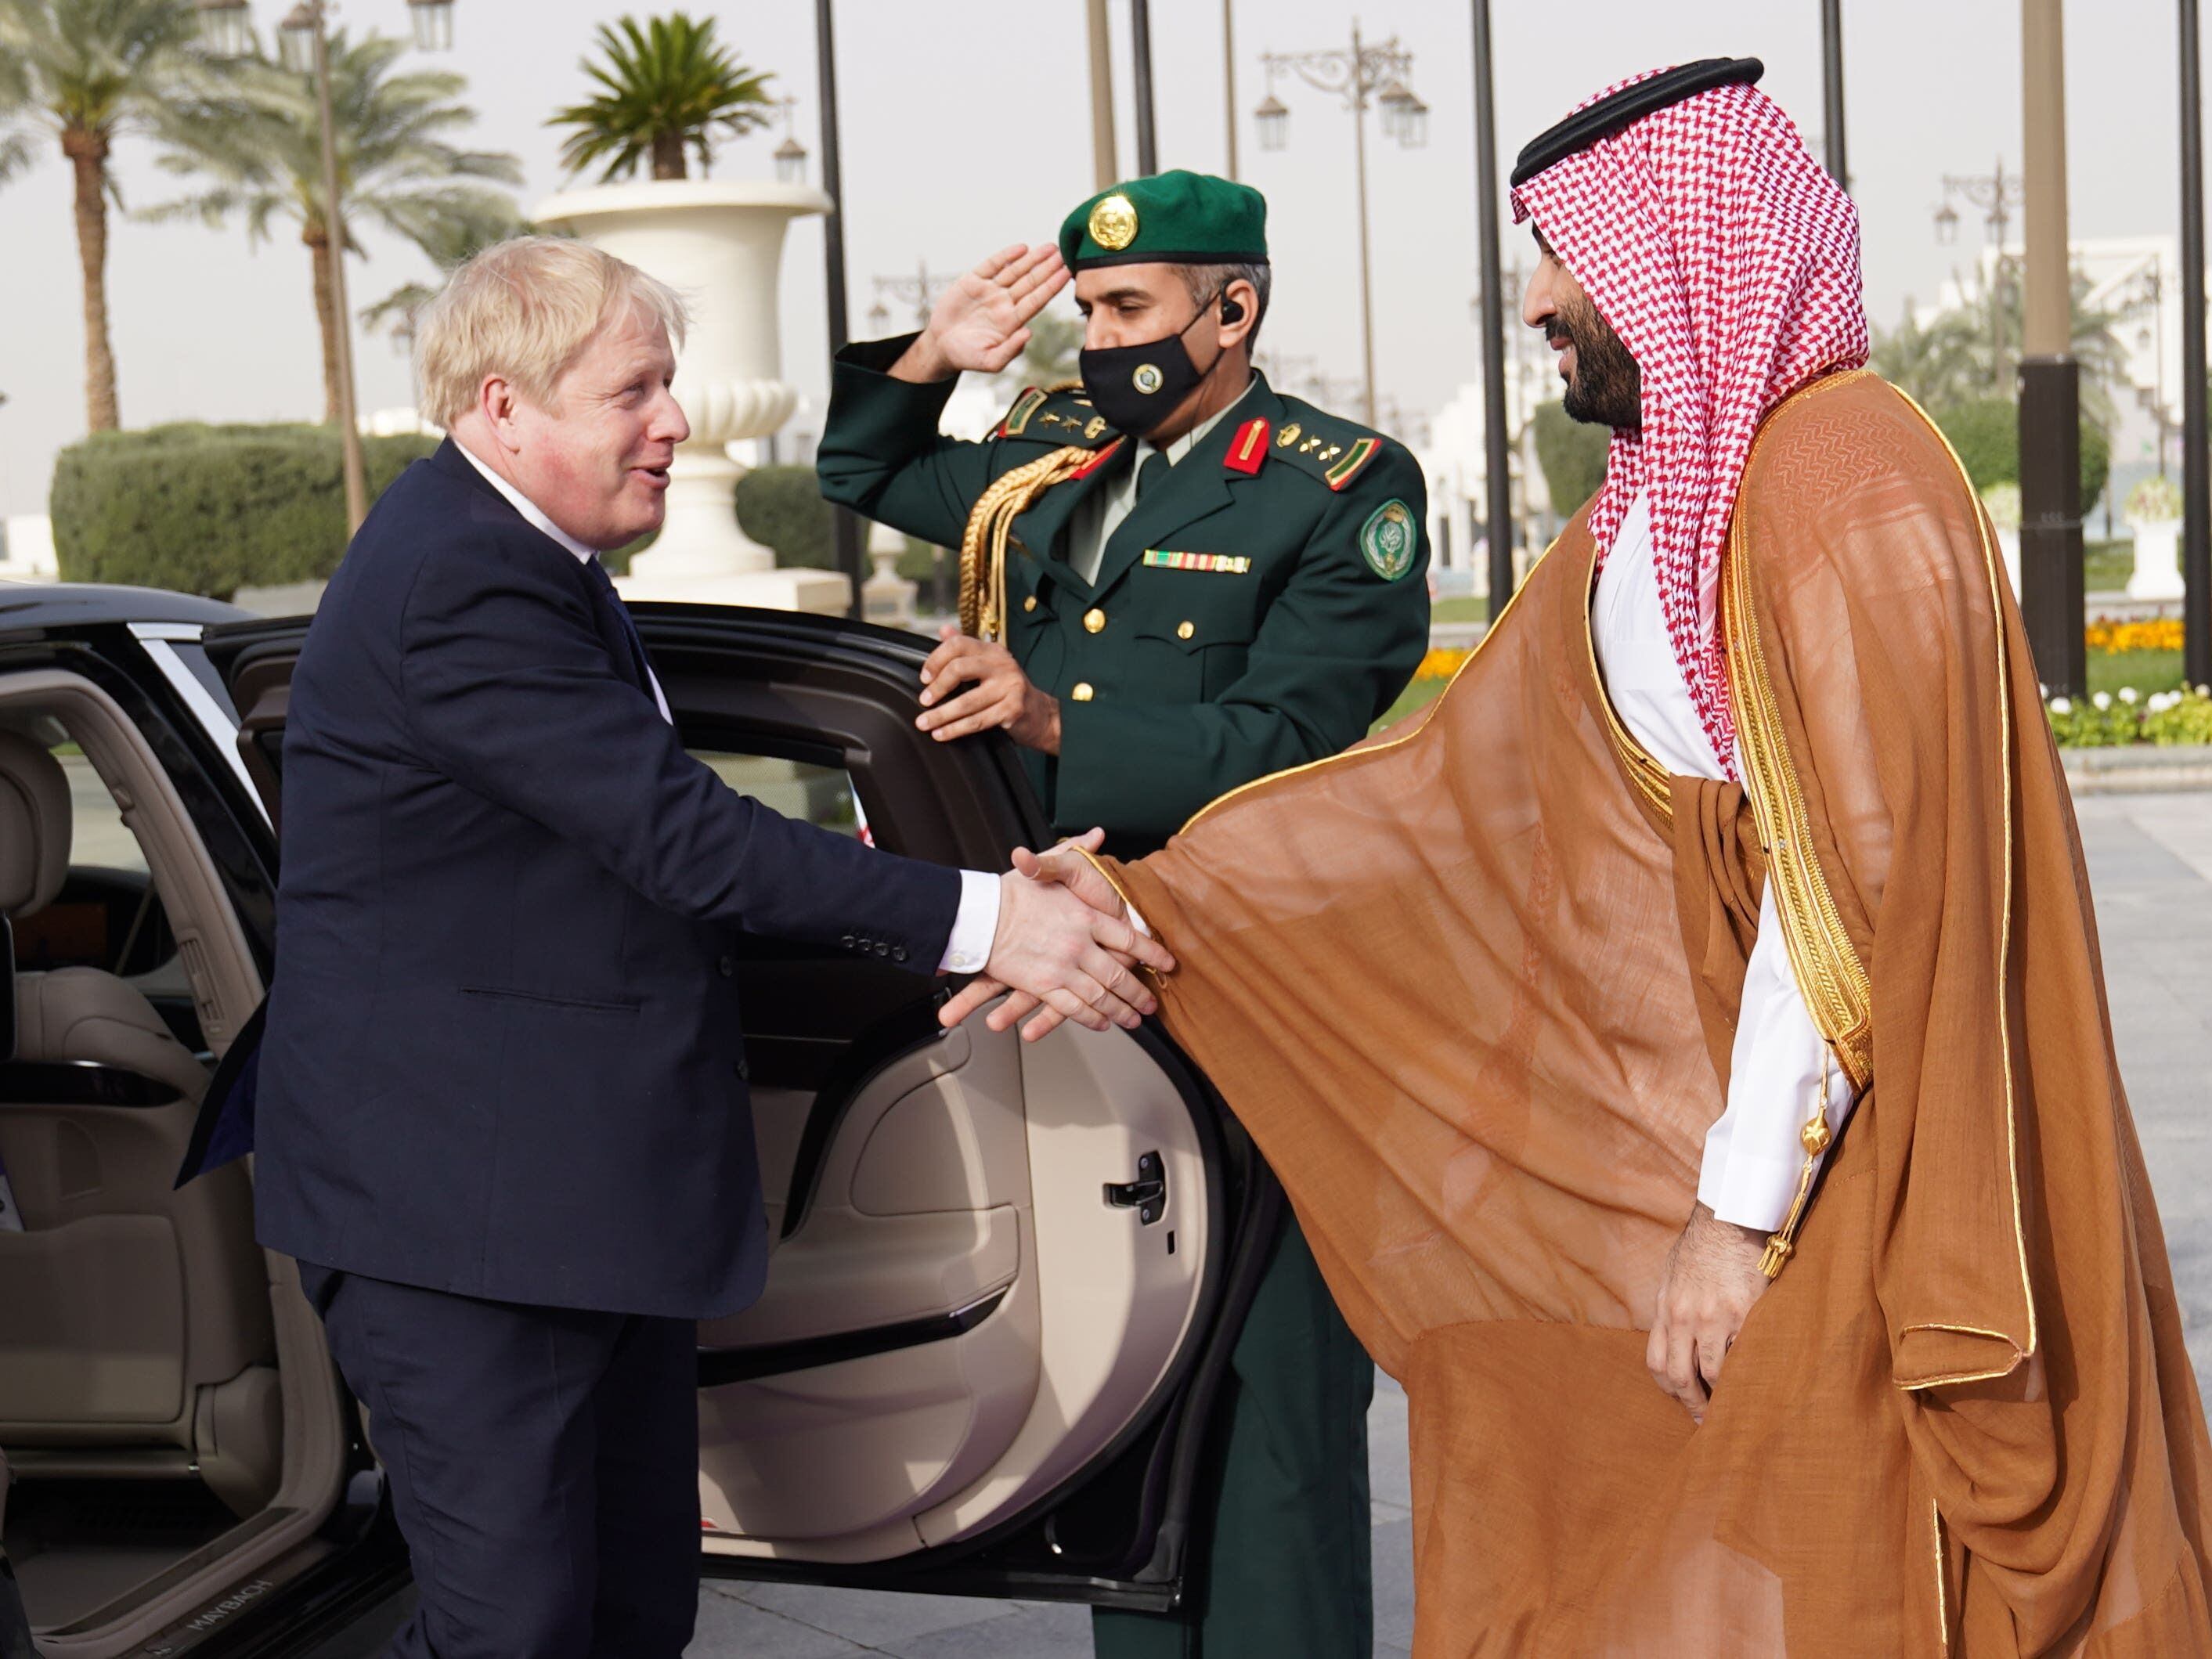 PM can boast no oil commitments during ‘dictator to dictator’ trip to Saudi